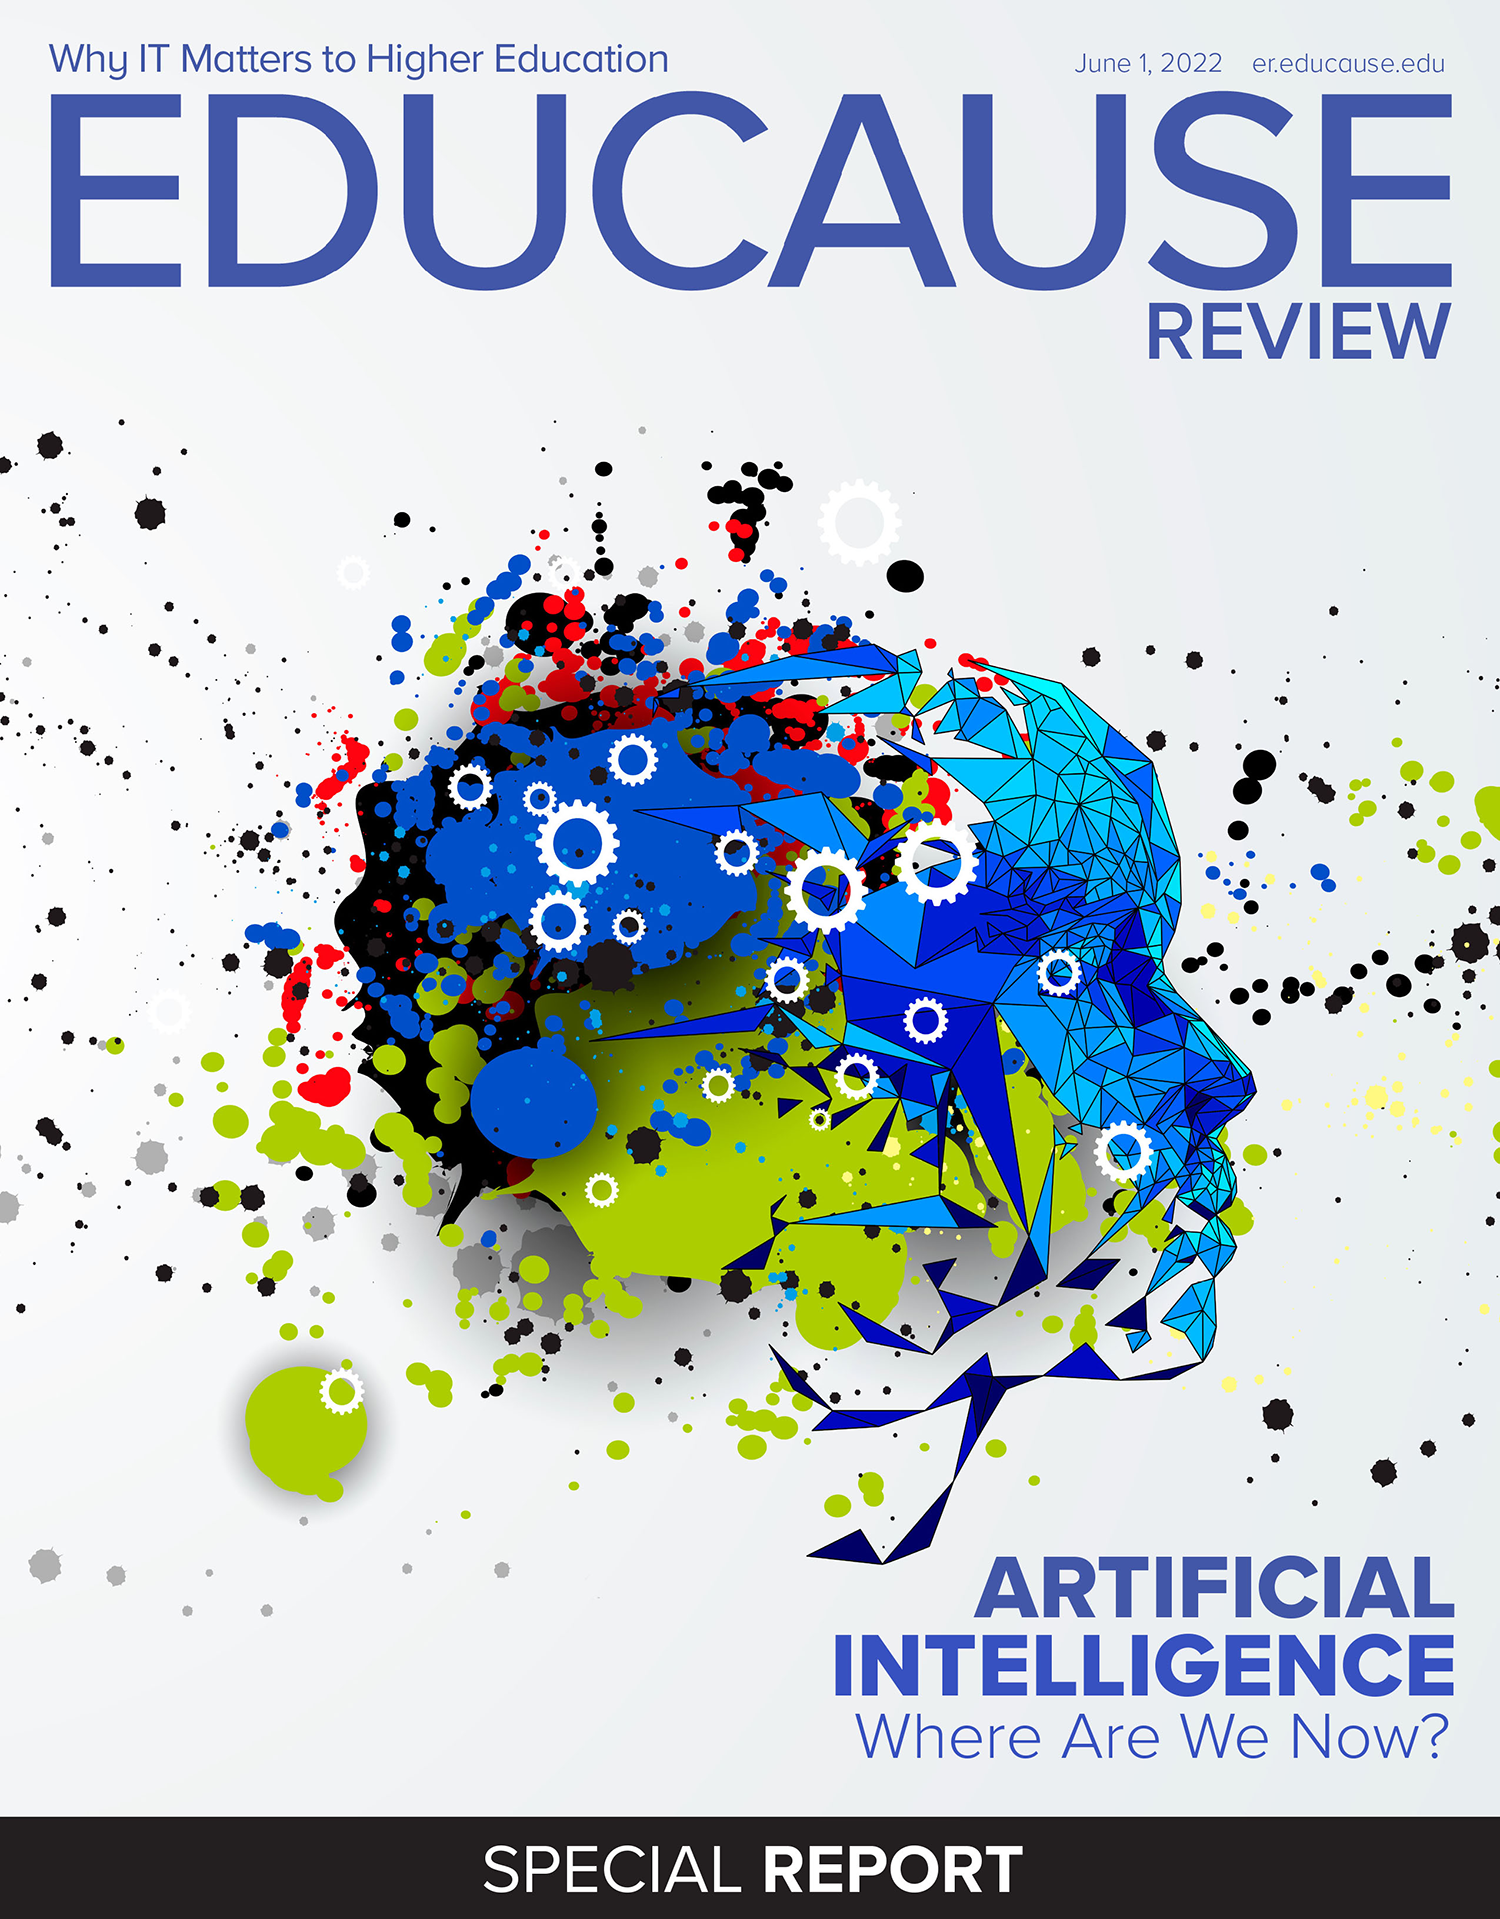 Artificial Intelligence: Where Are We Now? Special Report | EDUCAUSE Review June 1, 2022 click to open full PDF